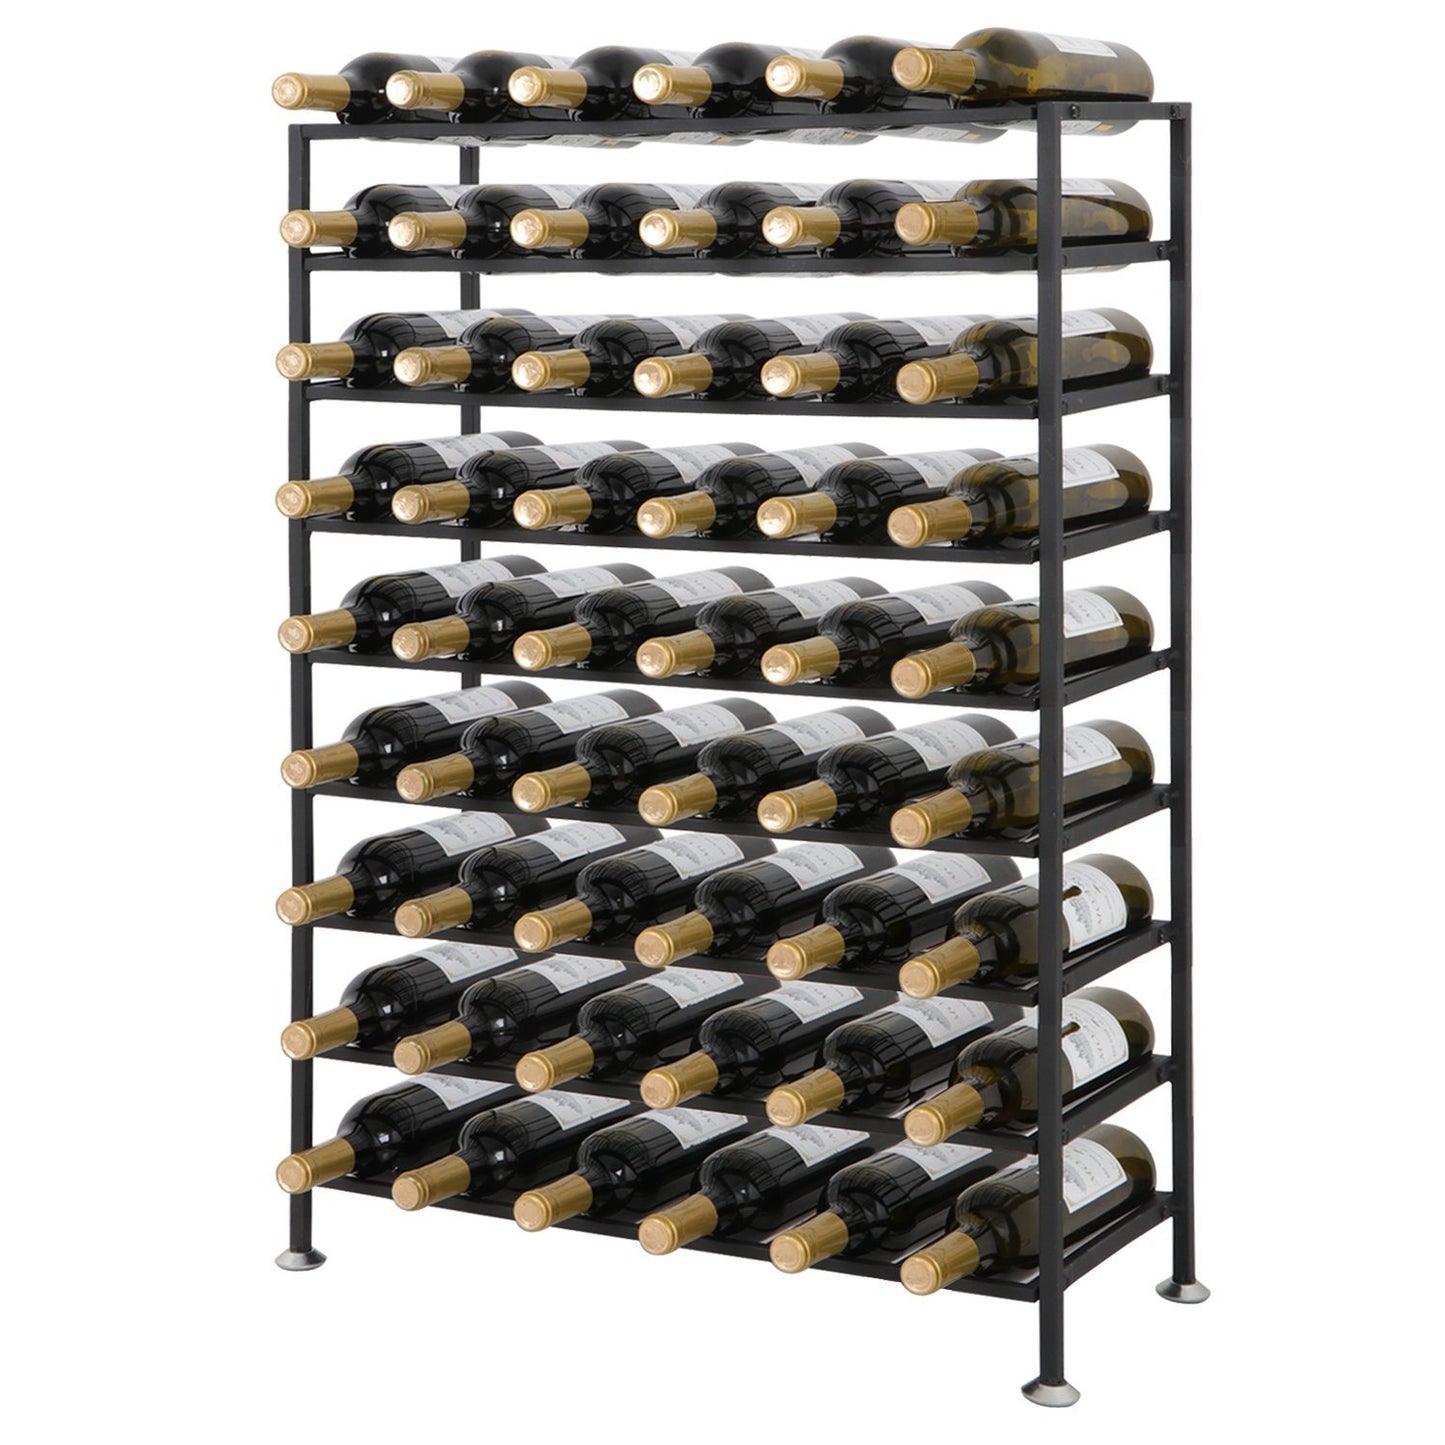 Organize with homgarden 54 bottle free standing deluxe large foldable metal wine rack cellar storage organizer shelves kitchen decor cabinet display stand holder